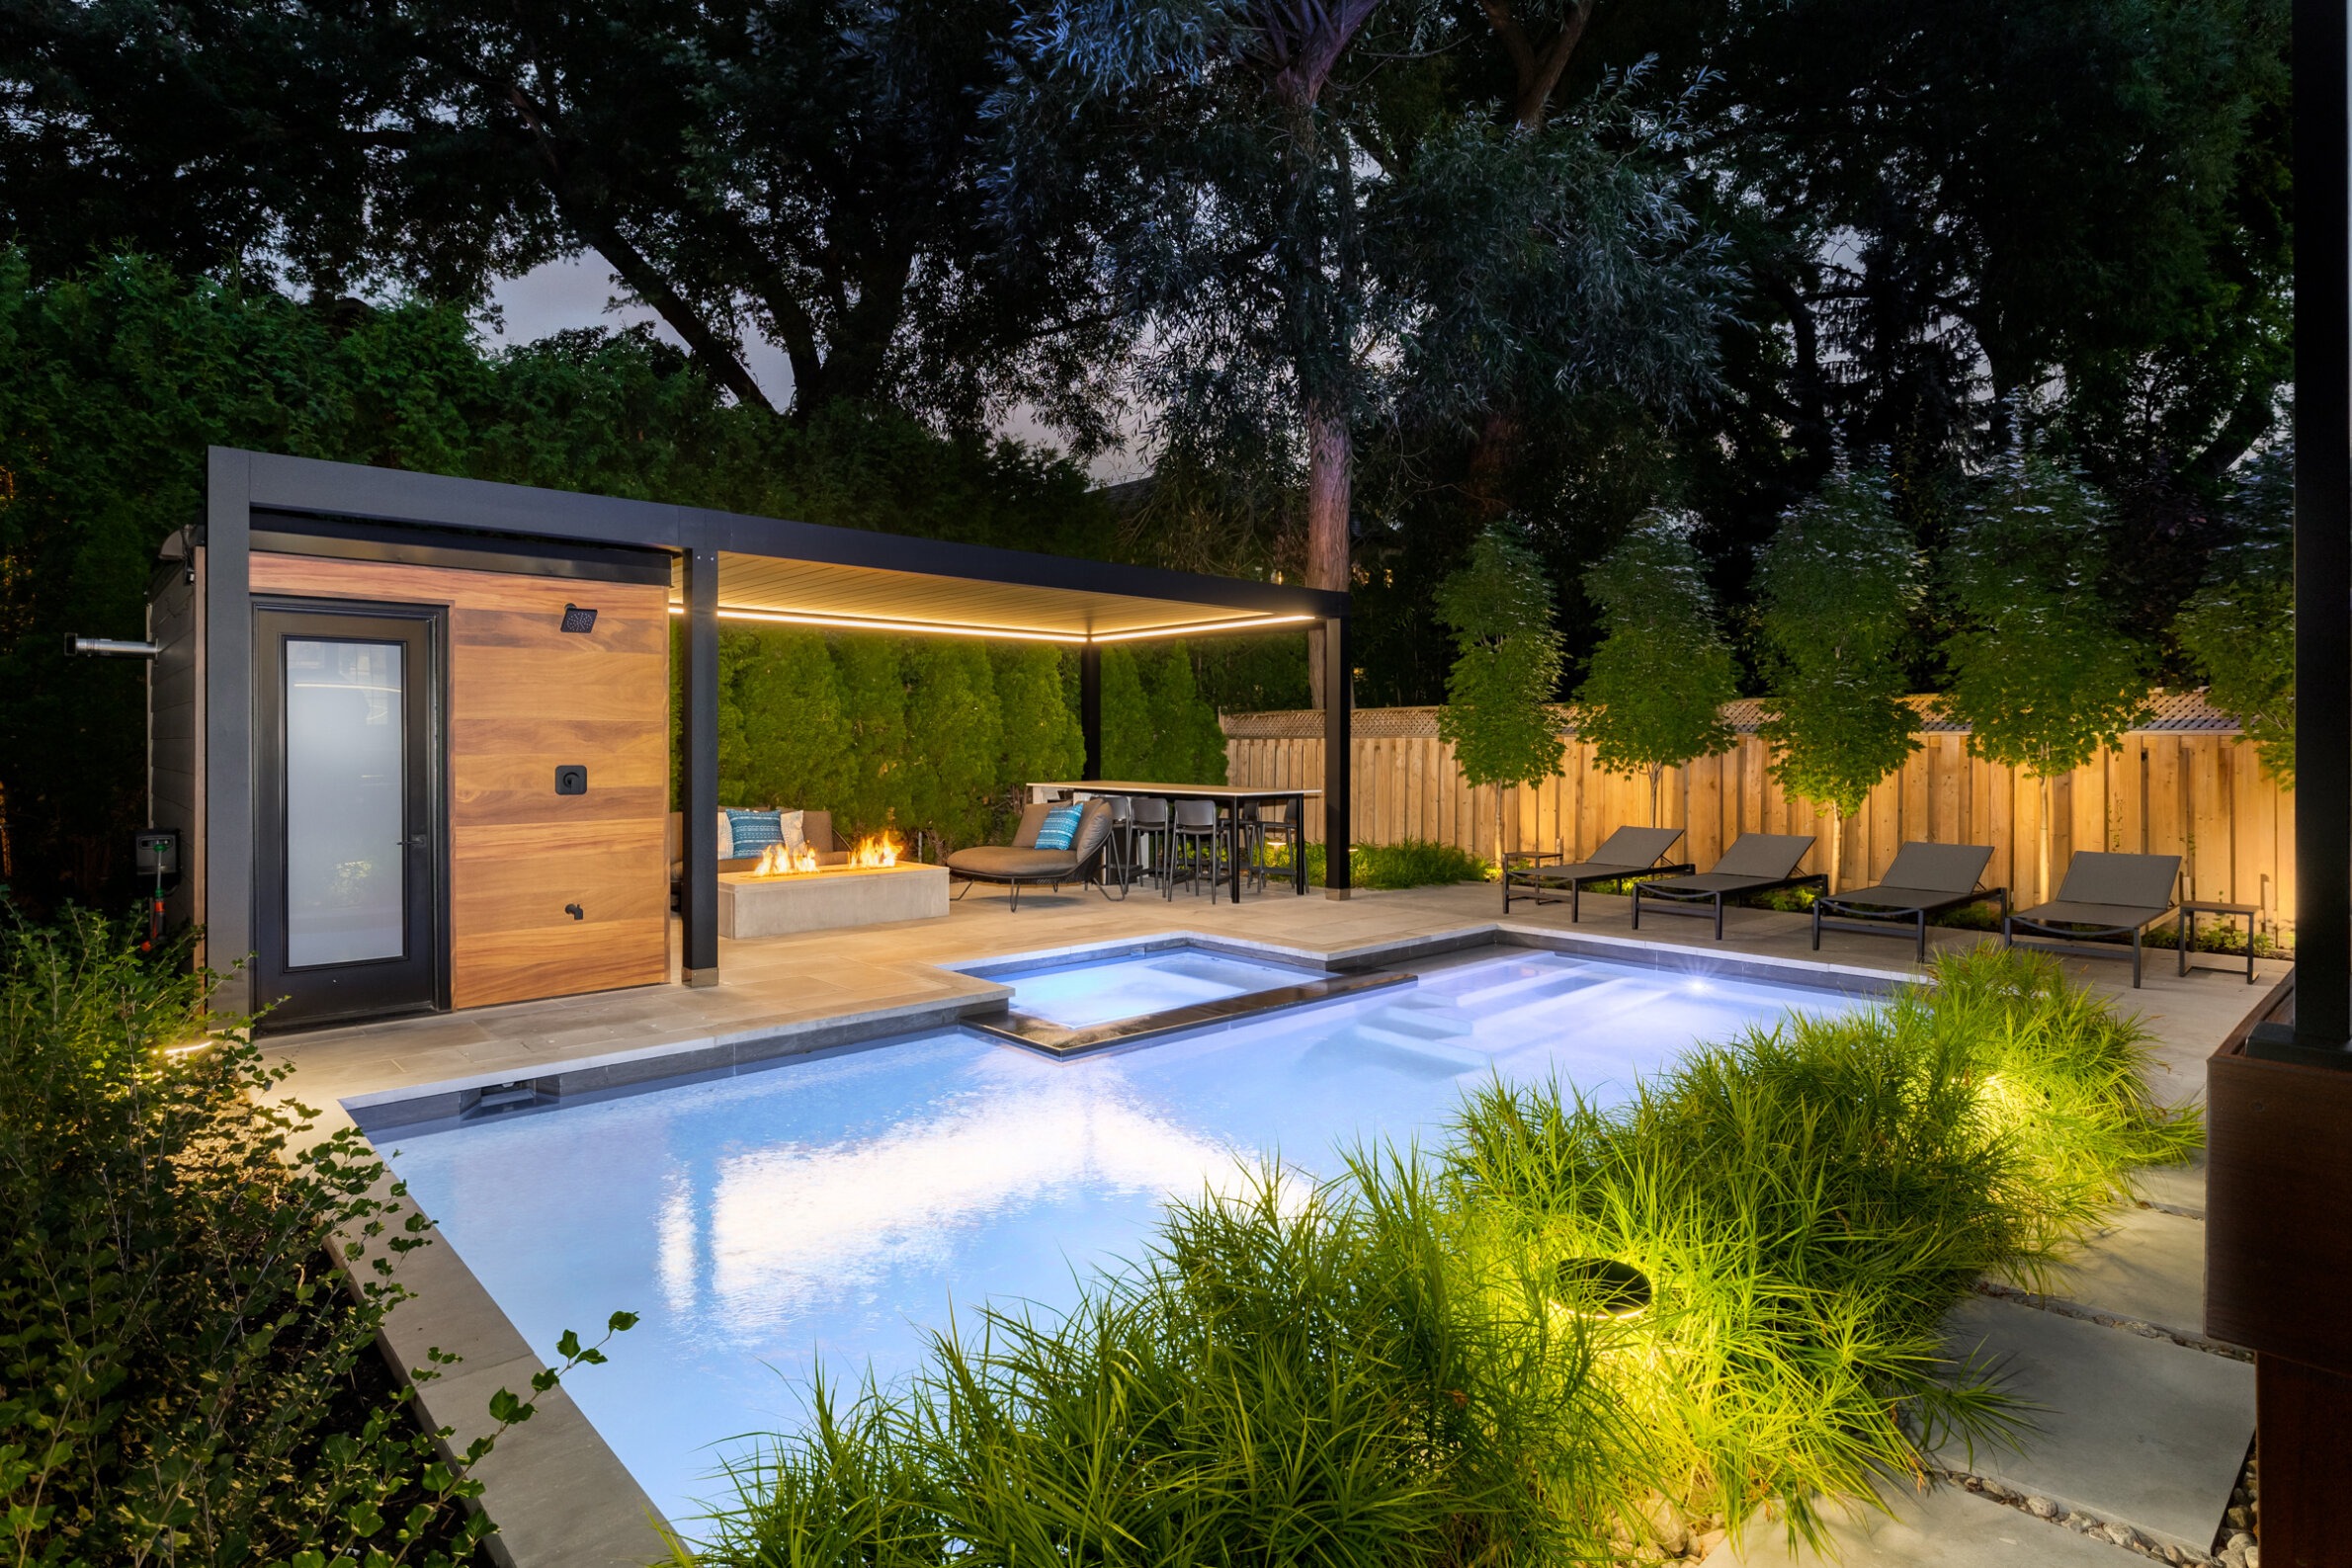 Modern backyard at dusk featuring a swimming pool, hot tub, outdoor seating, fire pit, chaise lounges, lighting, and lush greenery.